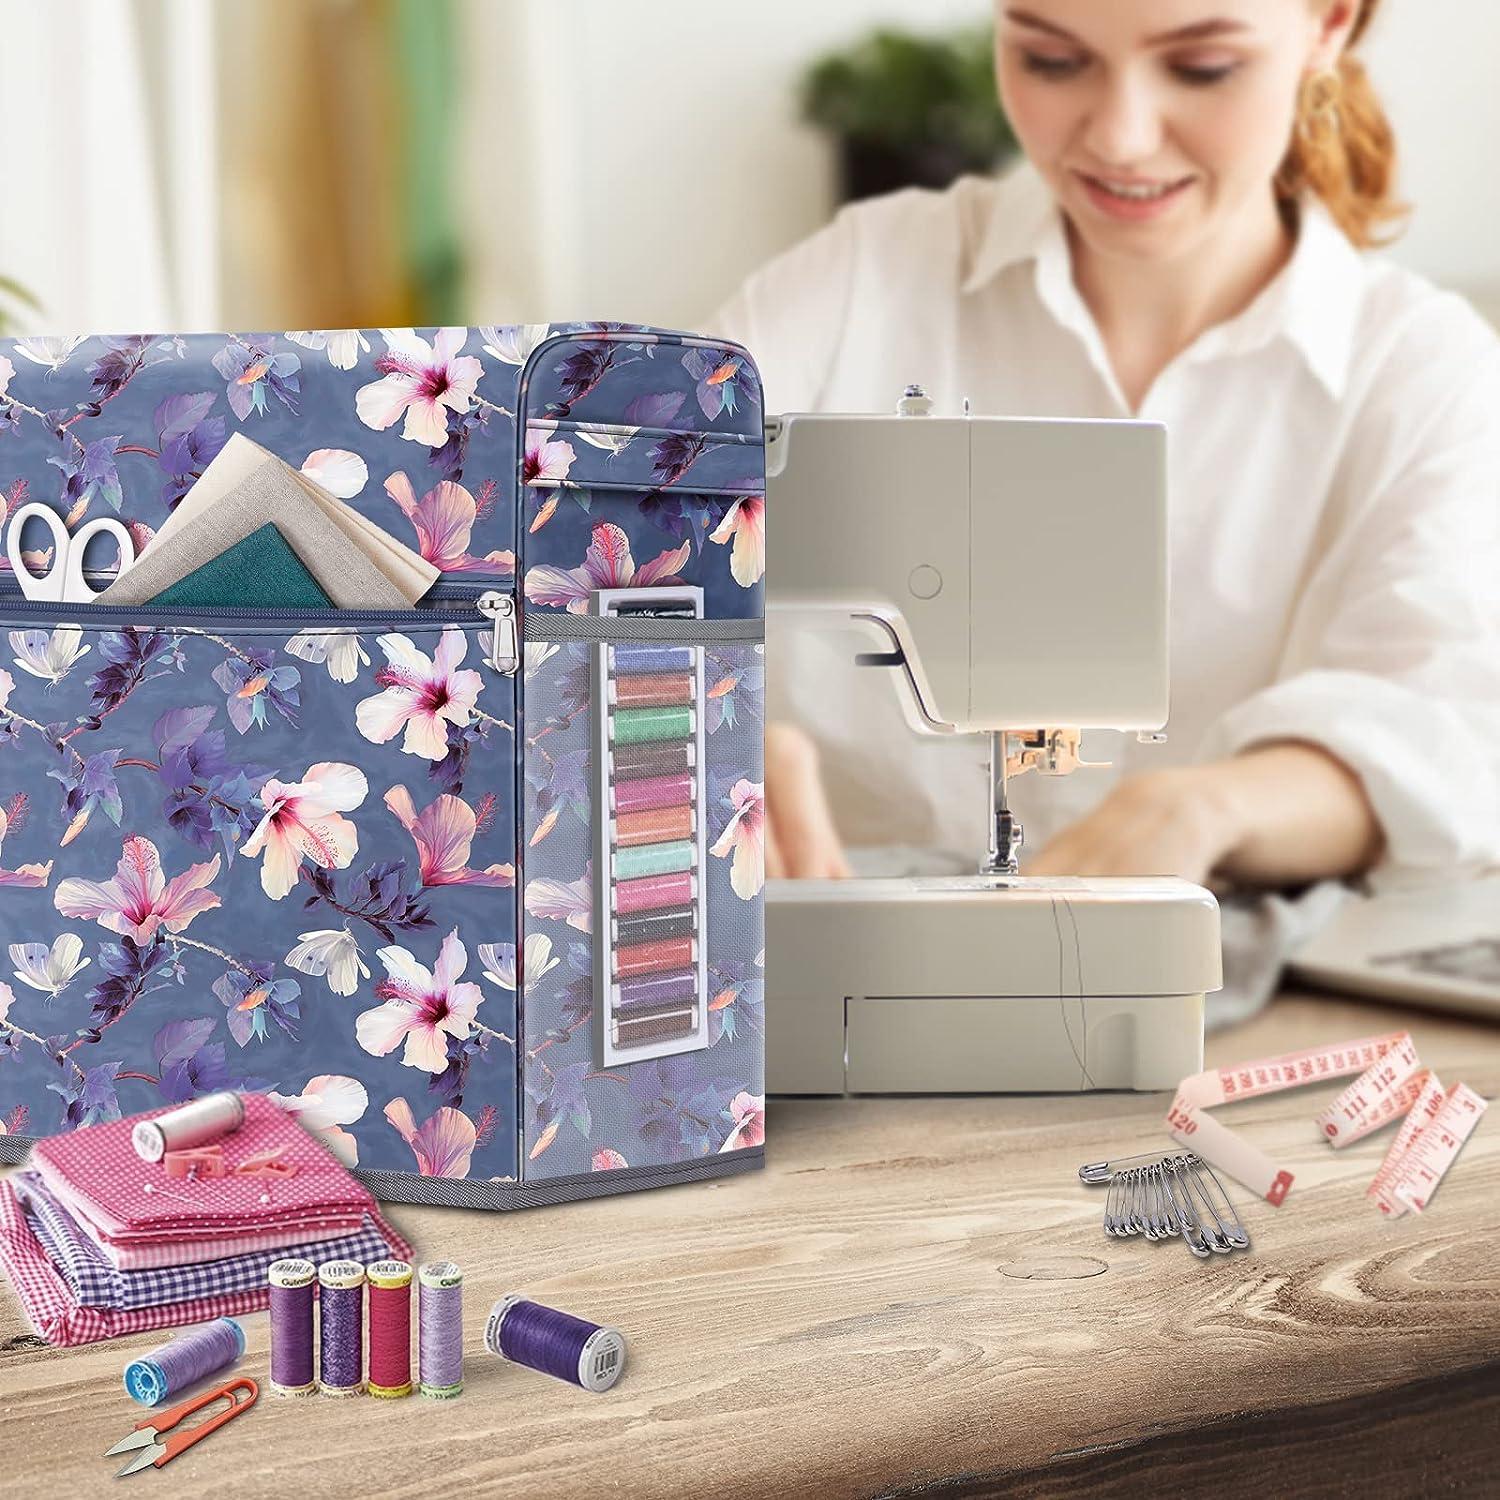 FINPAC Storage Bag for Sewing And Craft Supplies